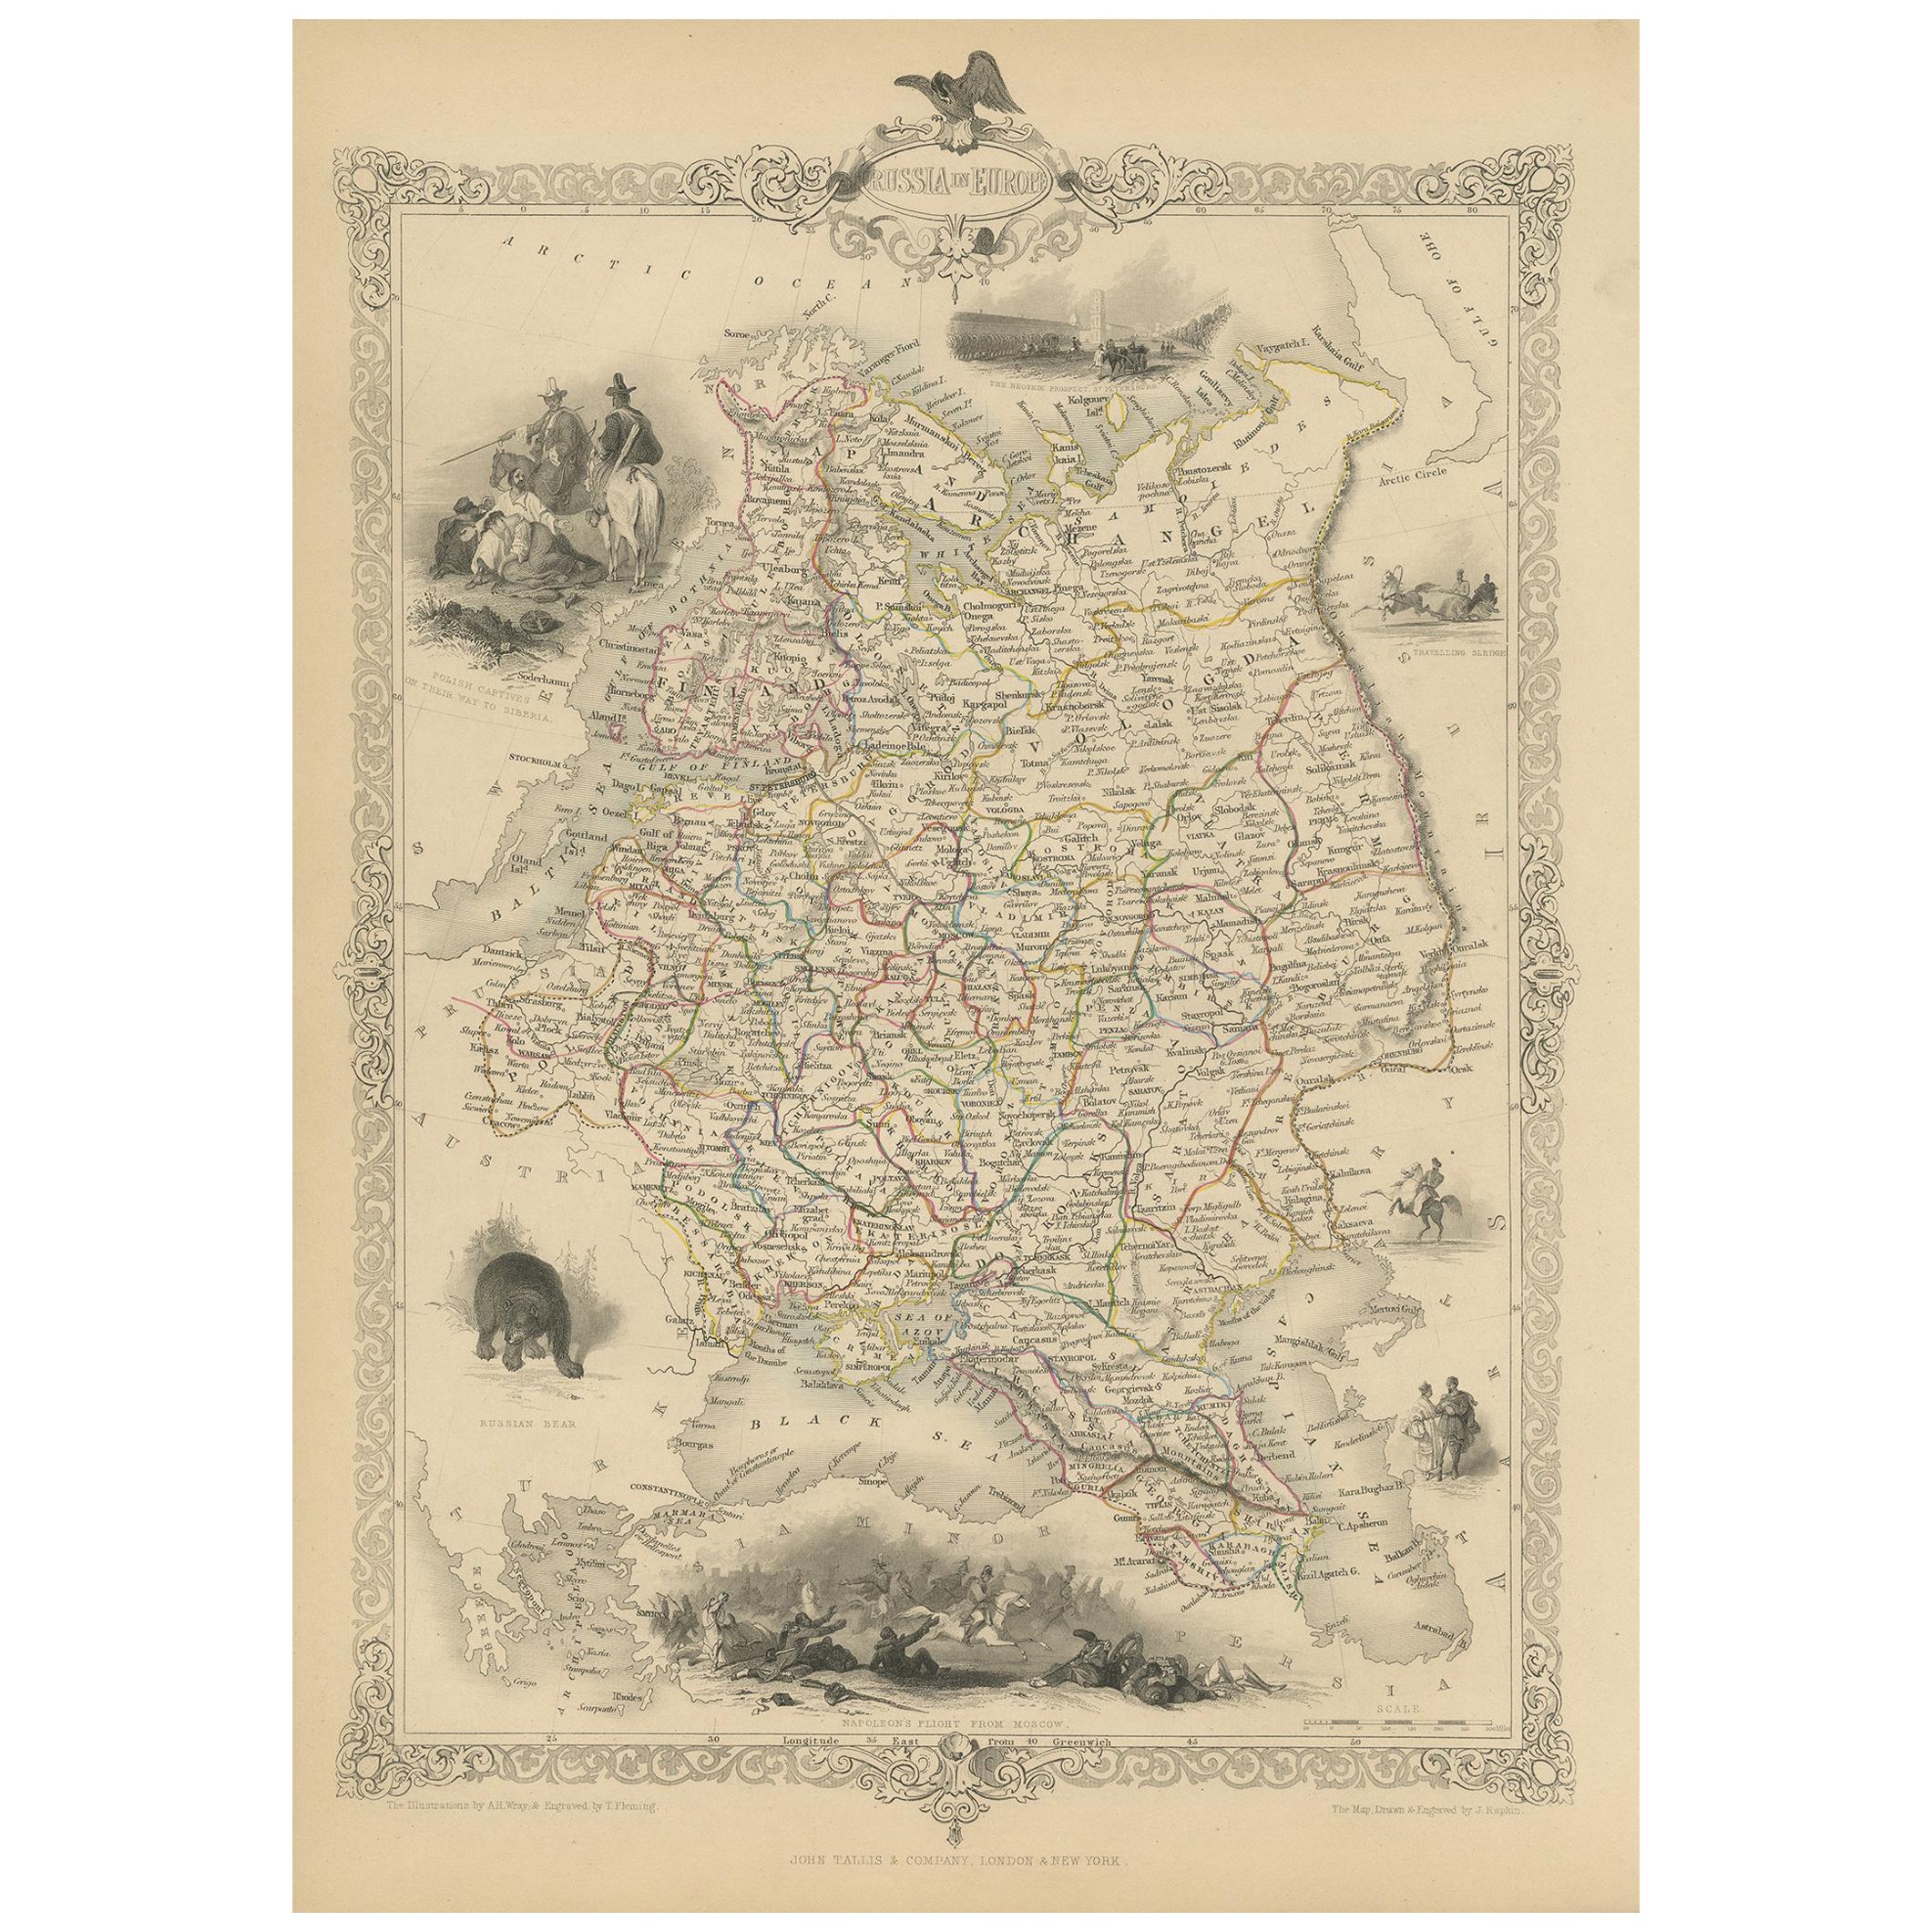 Antique Map of Russia in Europe by Tallis, '1851'